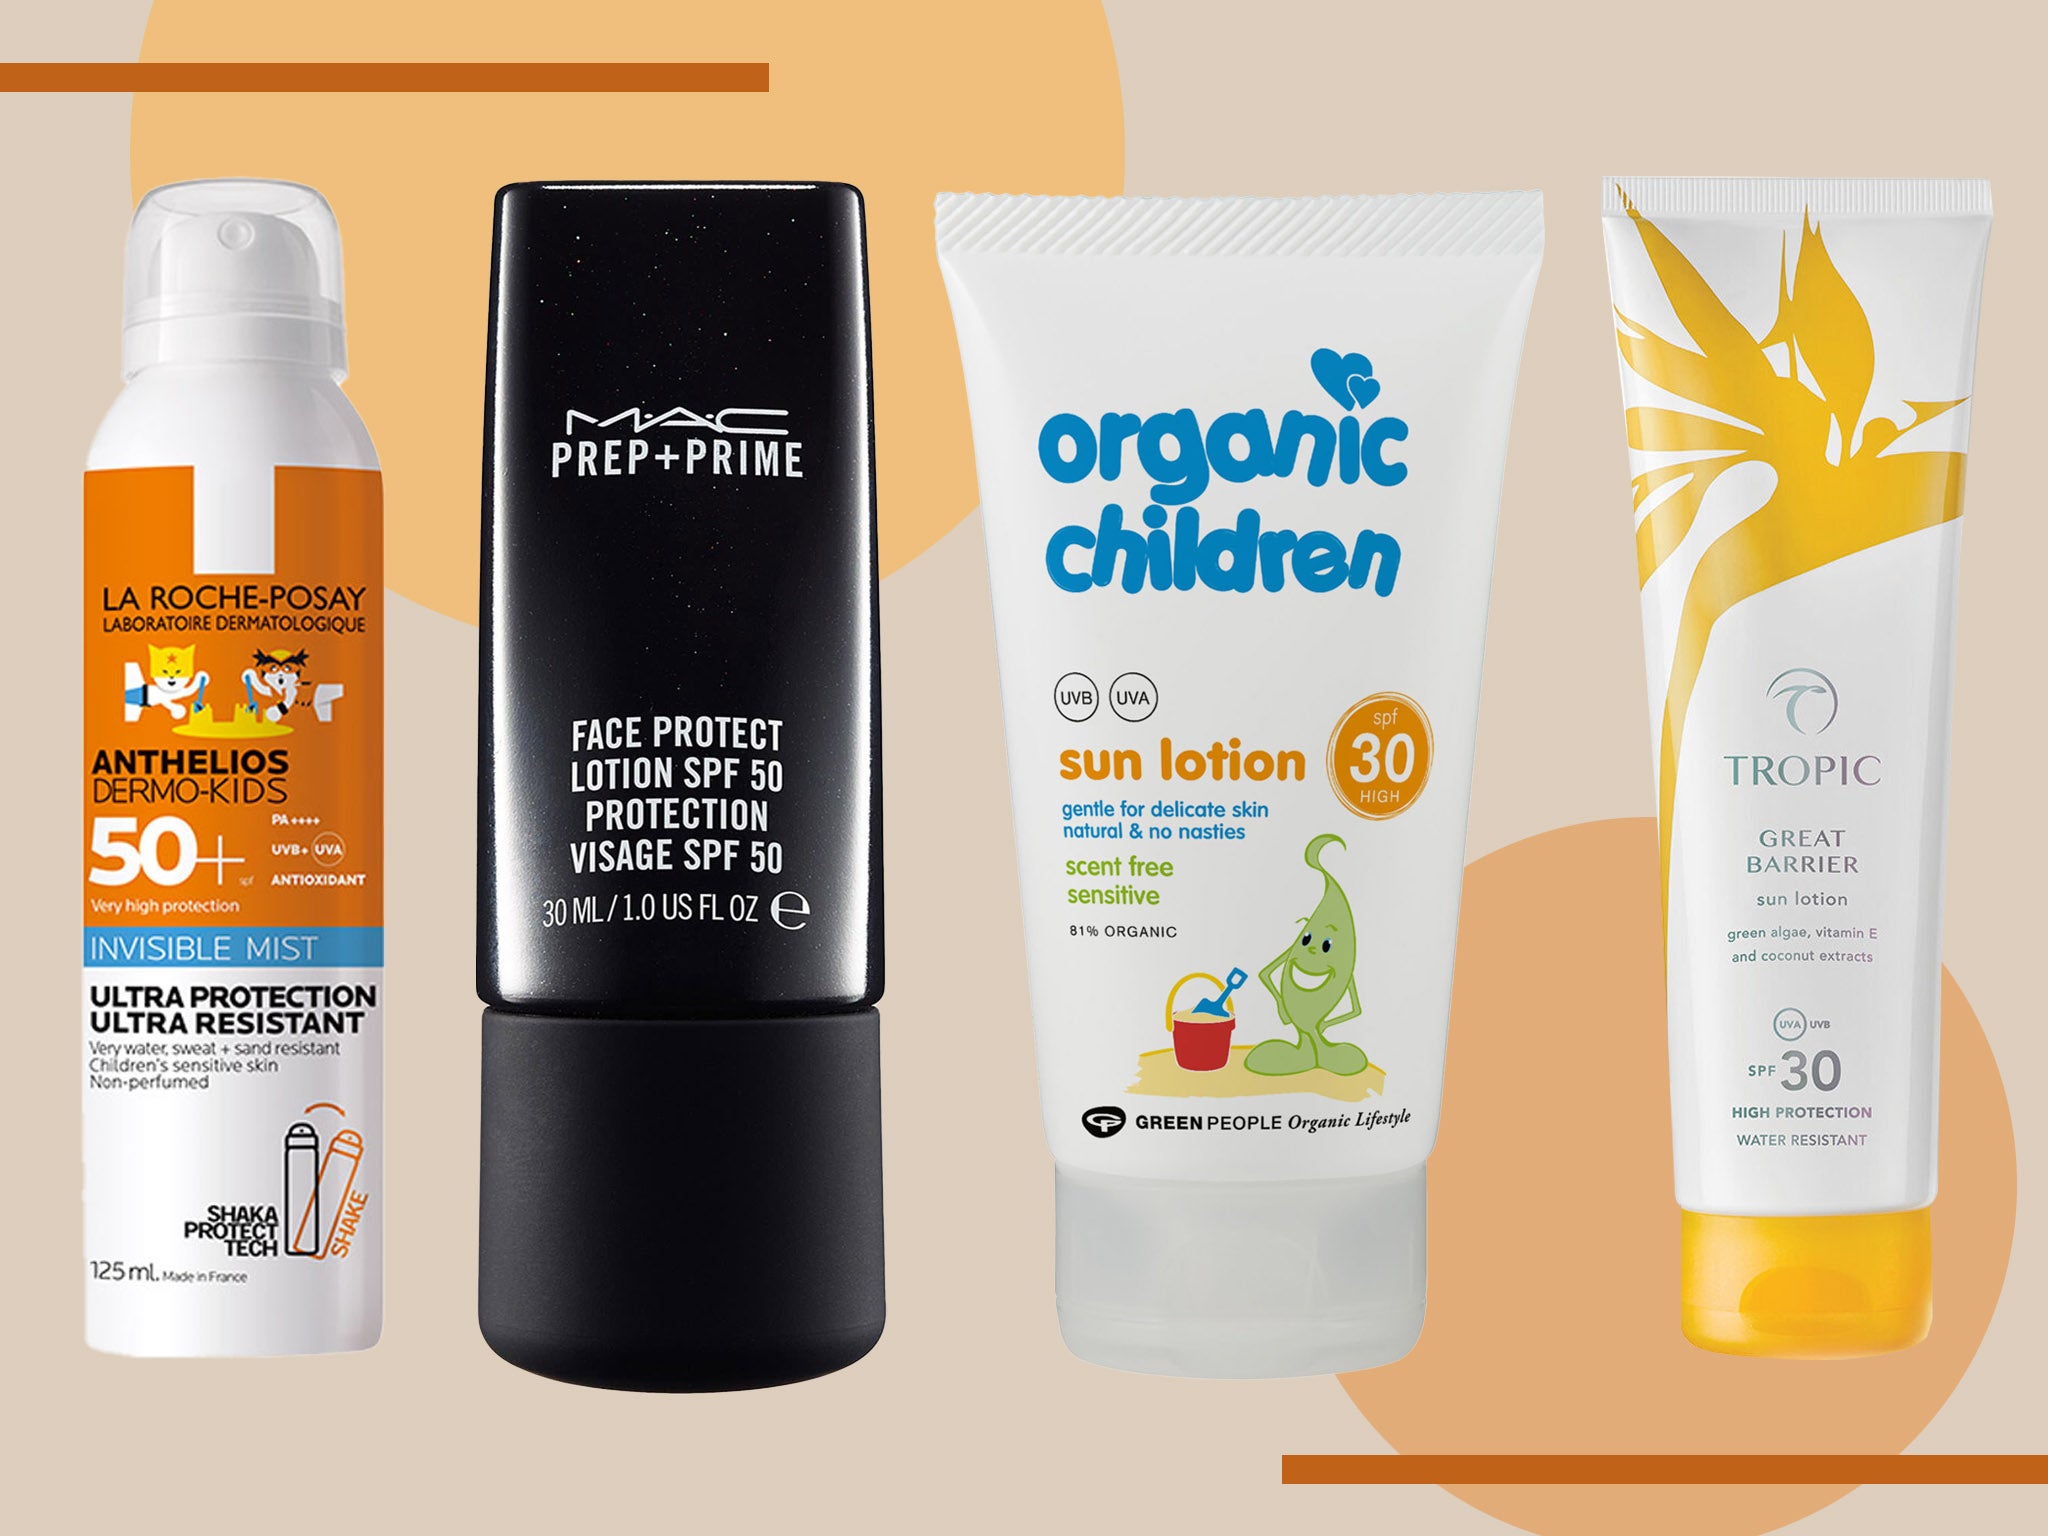 We’ve gathered expert advice on every type of formula, from facial creams to baby-friendly protection